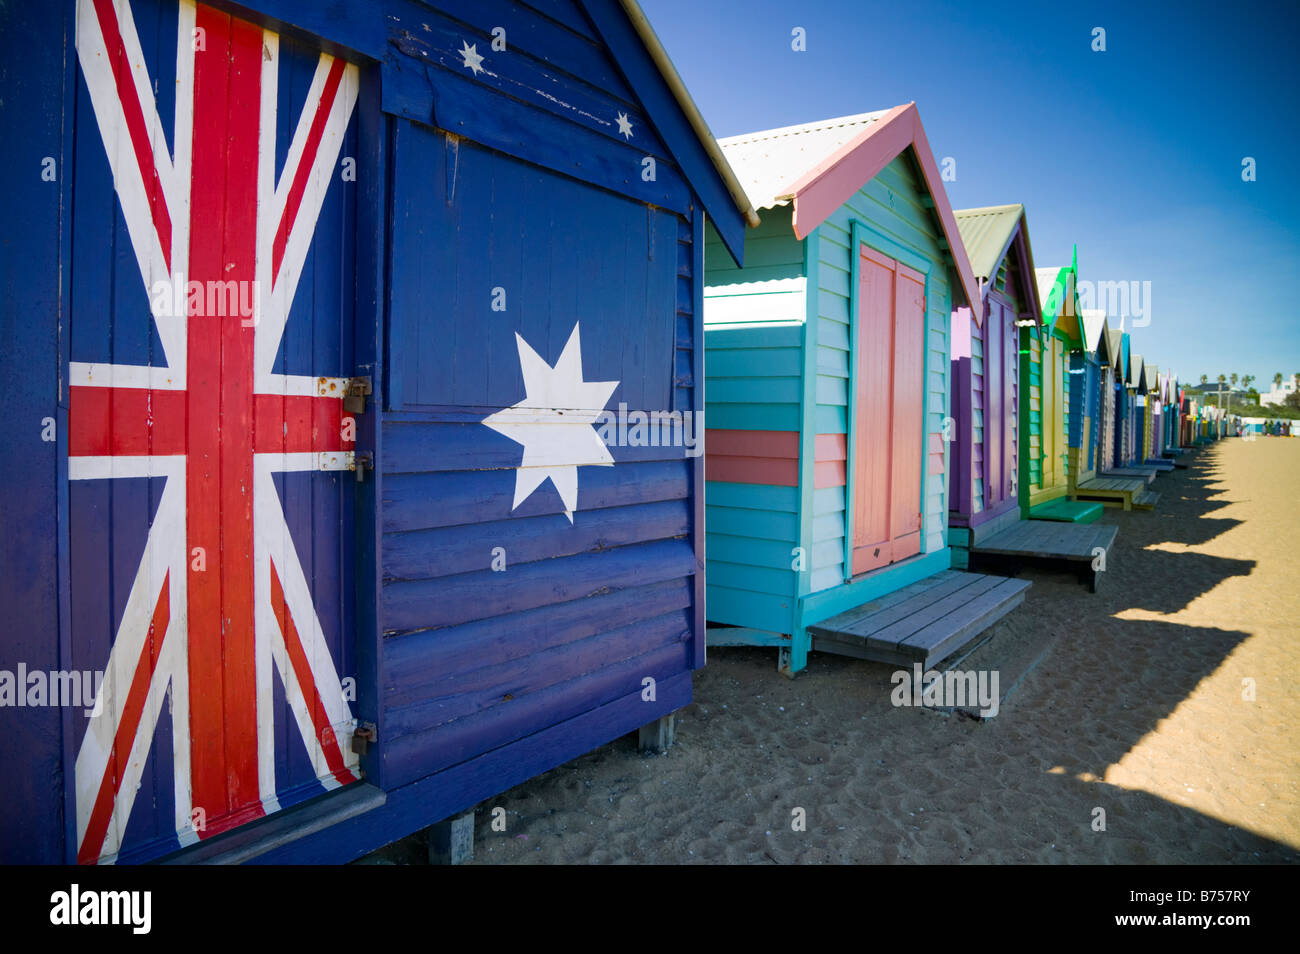 Beautifully-designed bathing boxes line the Dendy Street Beach in Melbourne, Australia. Stock Photo